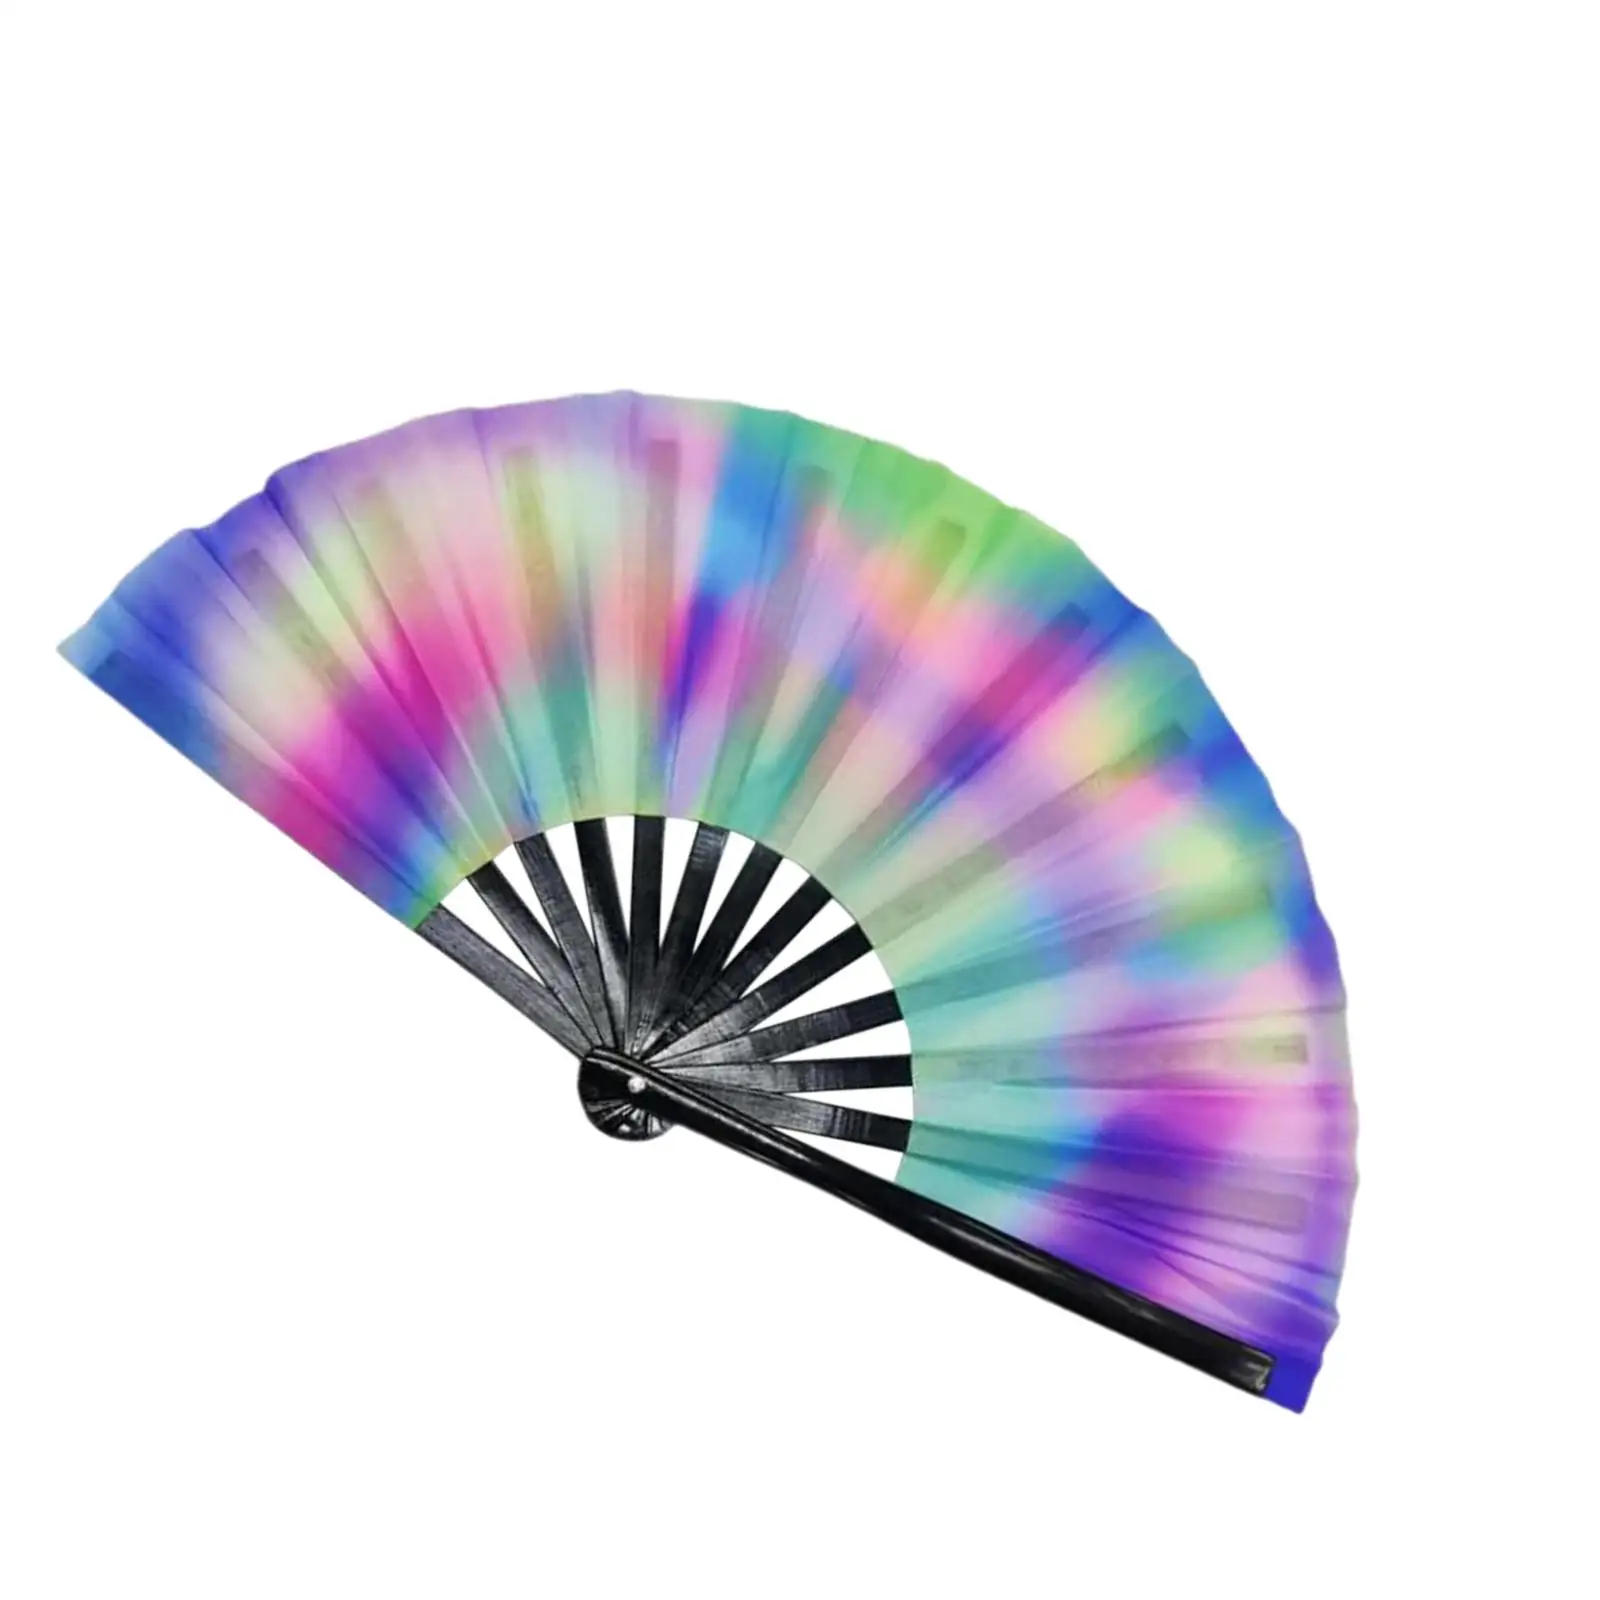 Large Rave Folding Hand Fan Fluorescent Effects for Party Accessories Gift